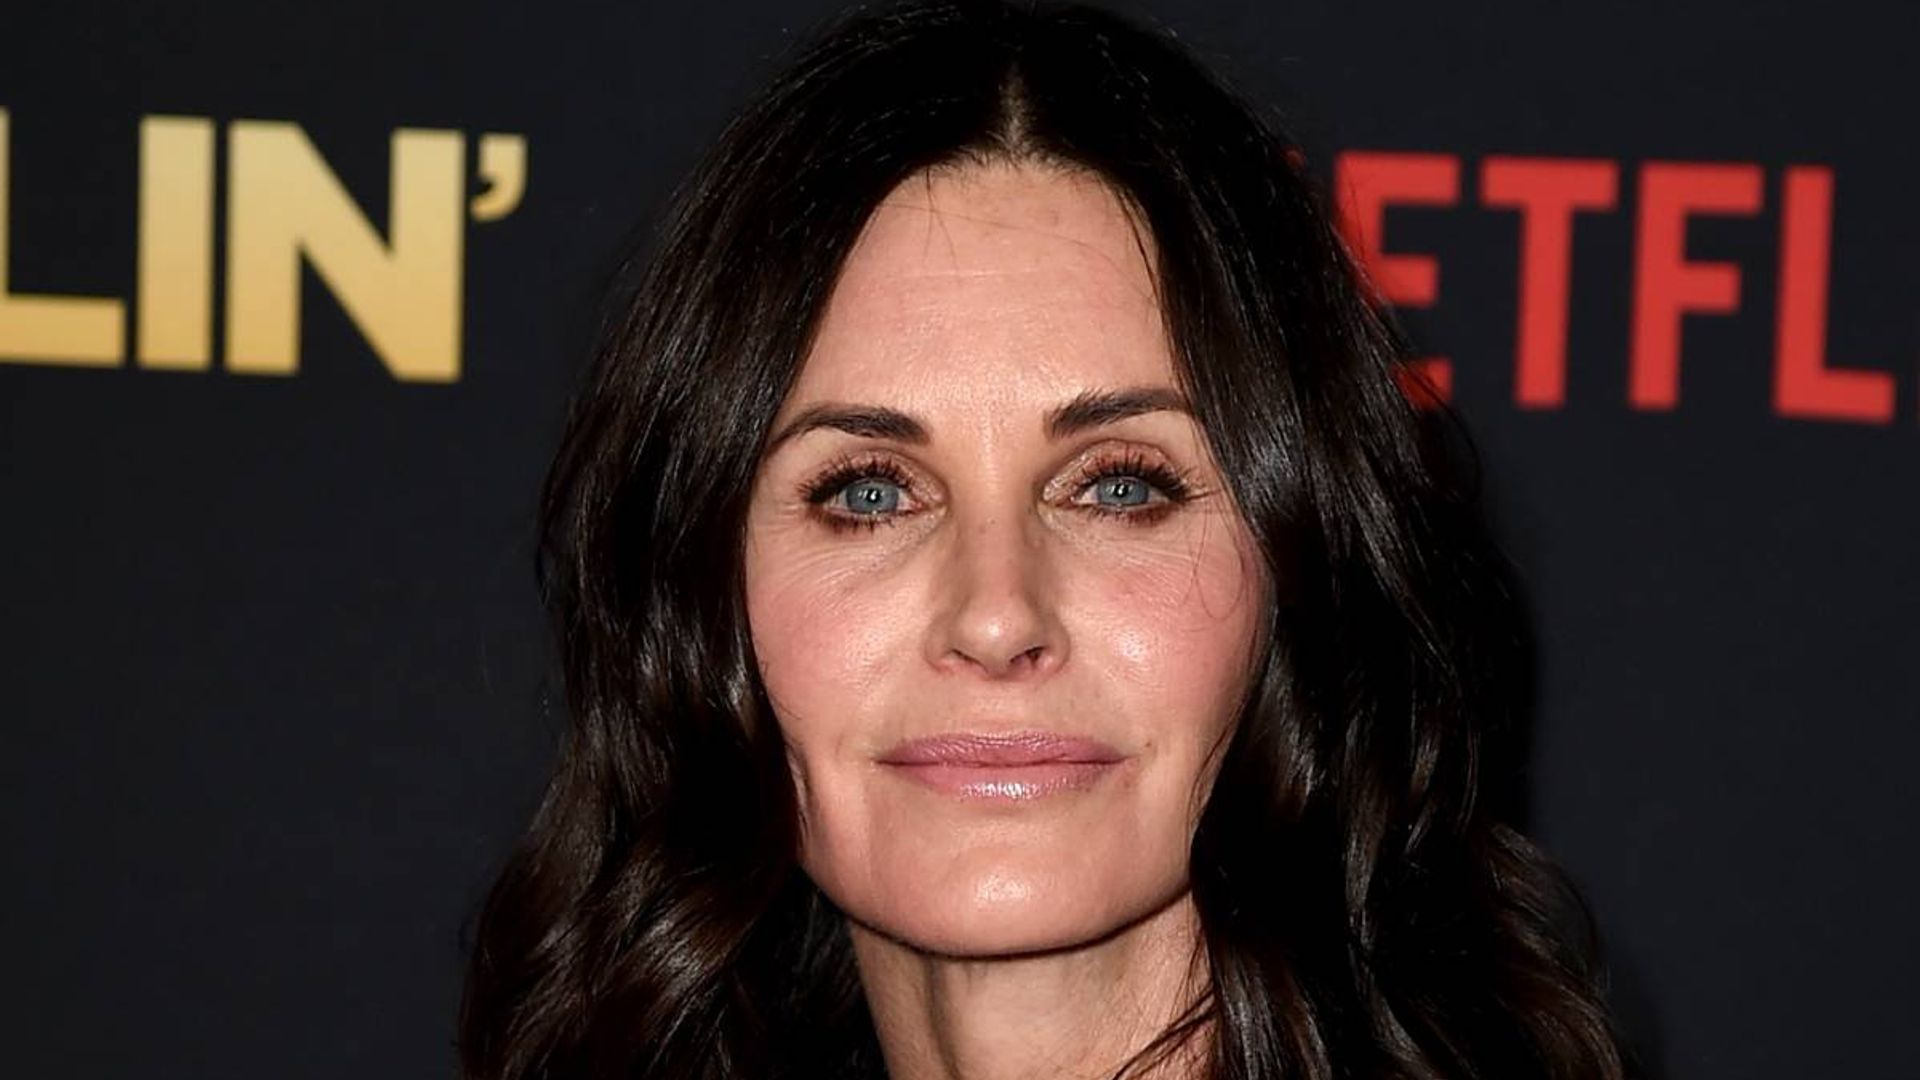 Courtney Cox dazzles in new video as she reveals regret over past transformation